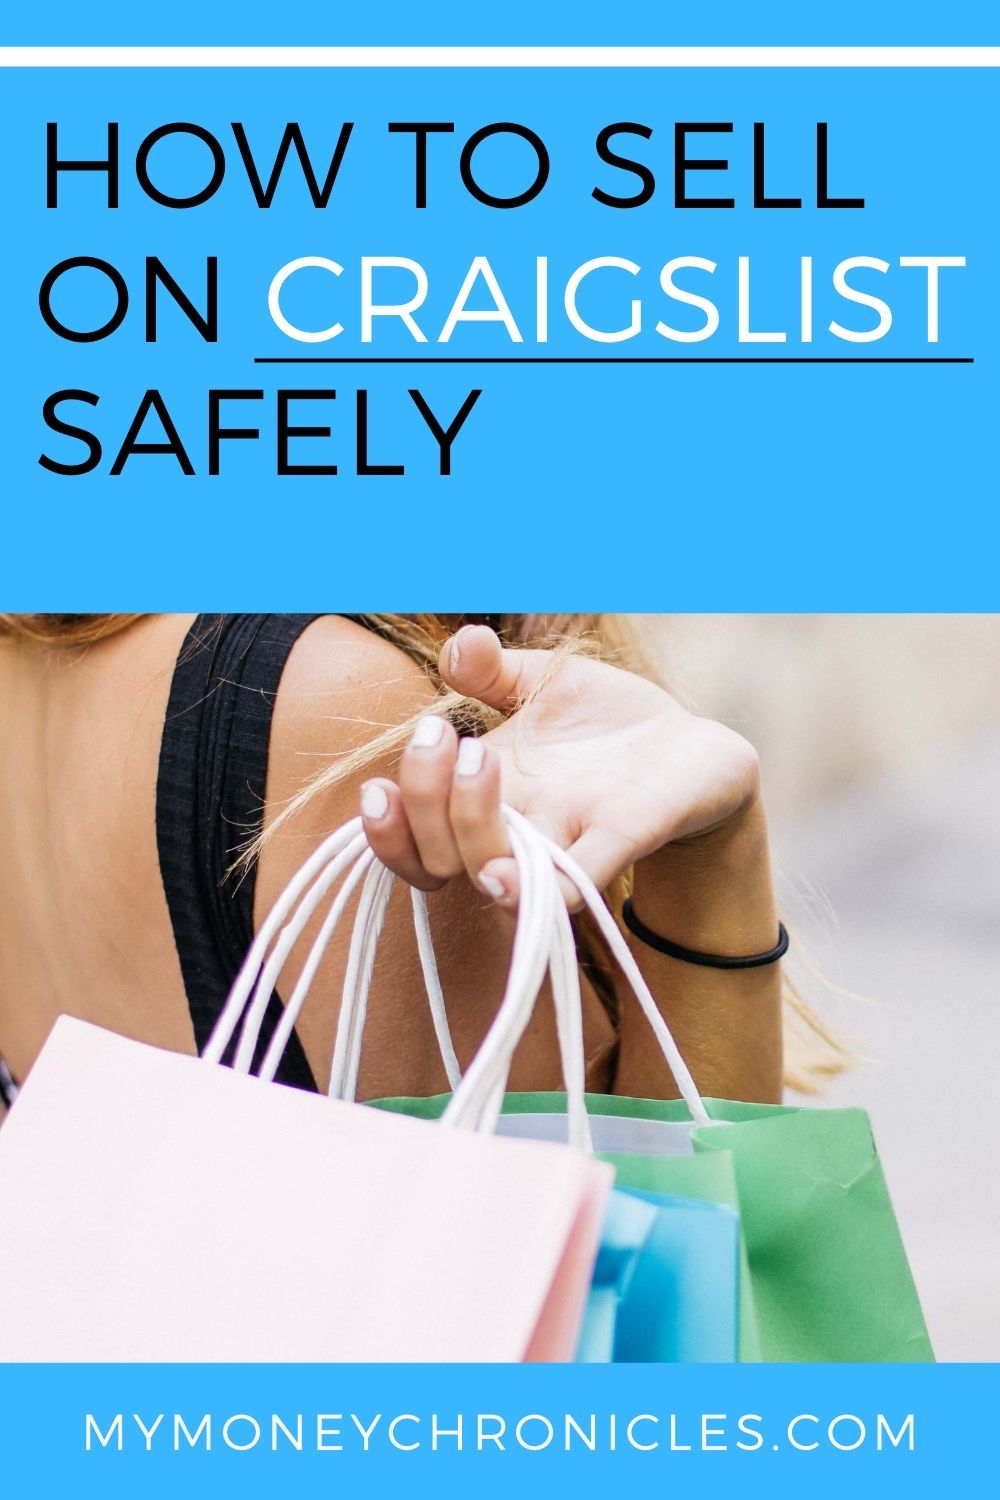 How to Sell on Craigslist Safely